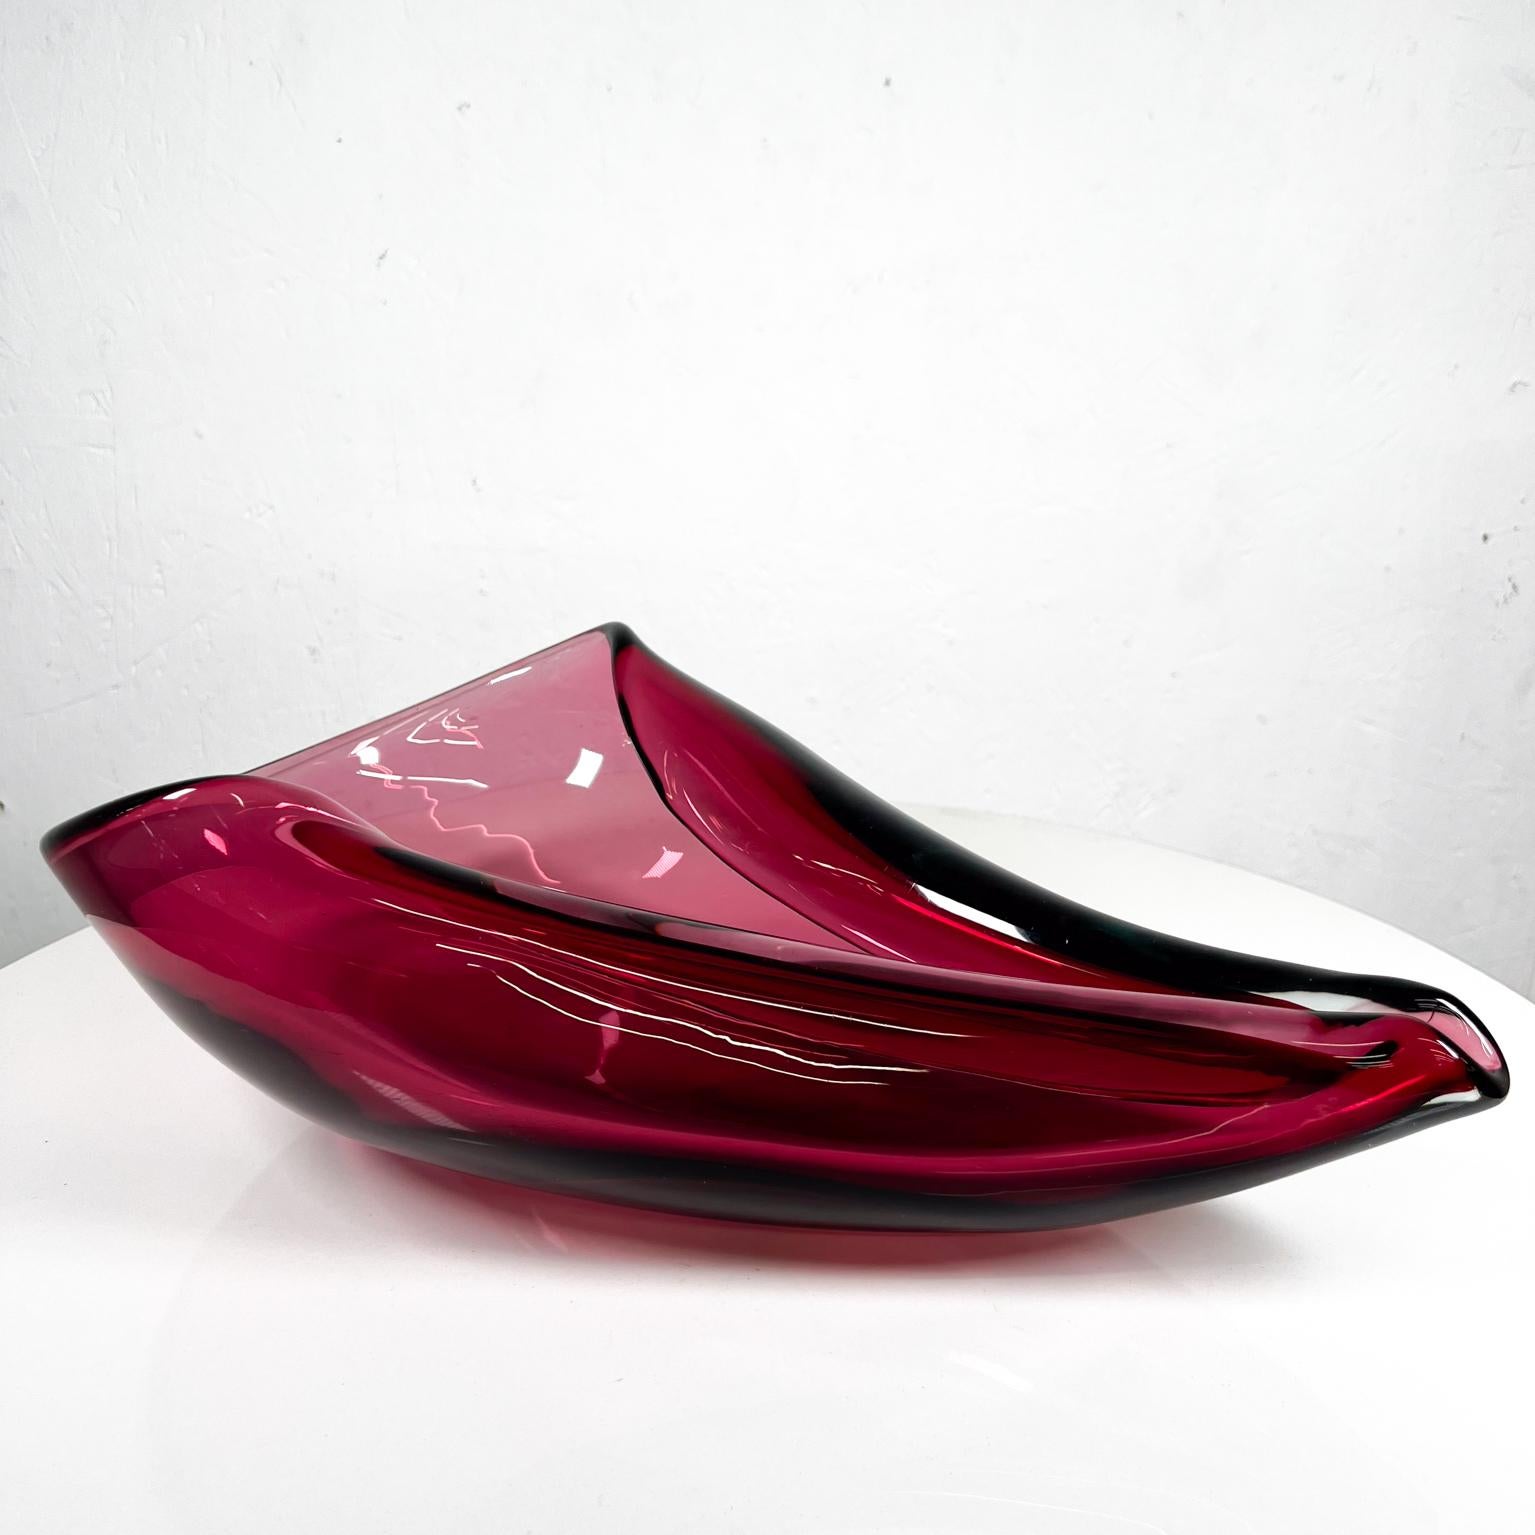 1960s Murano Sculptural Bowl Art Glass Organic Design Italy
16 long x 9.5 w x 5.5 h
Unmarked. No stamp.
Preowned original vintage condition.
See images provided please.


